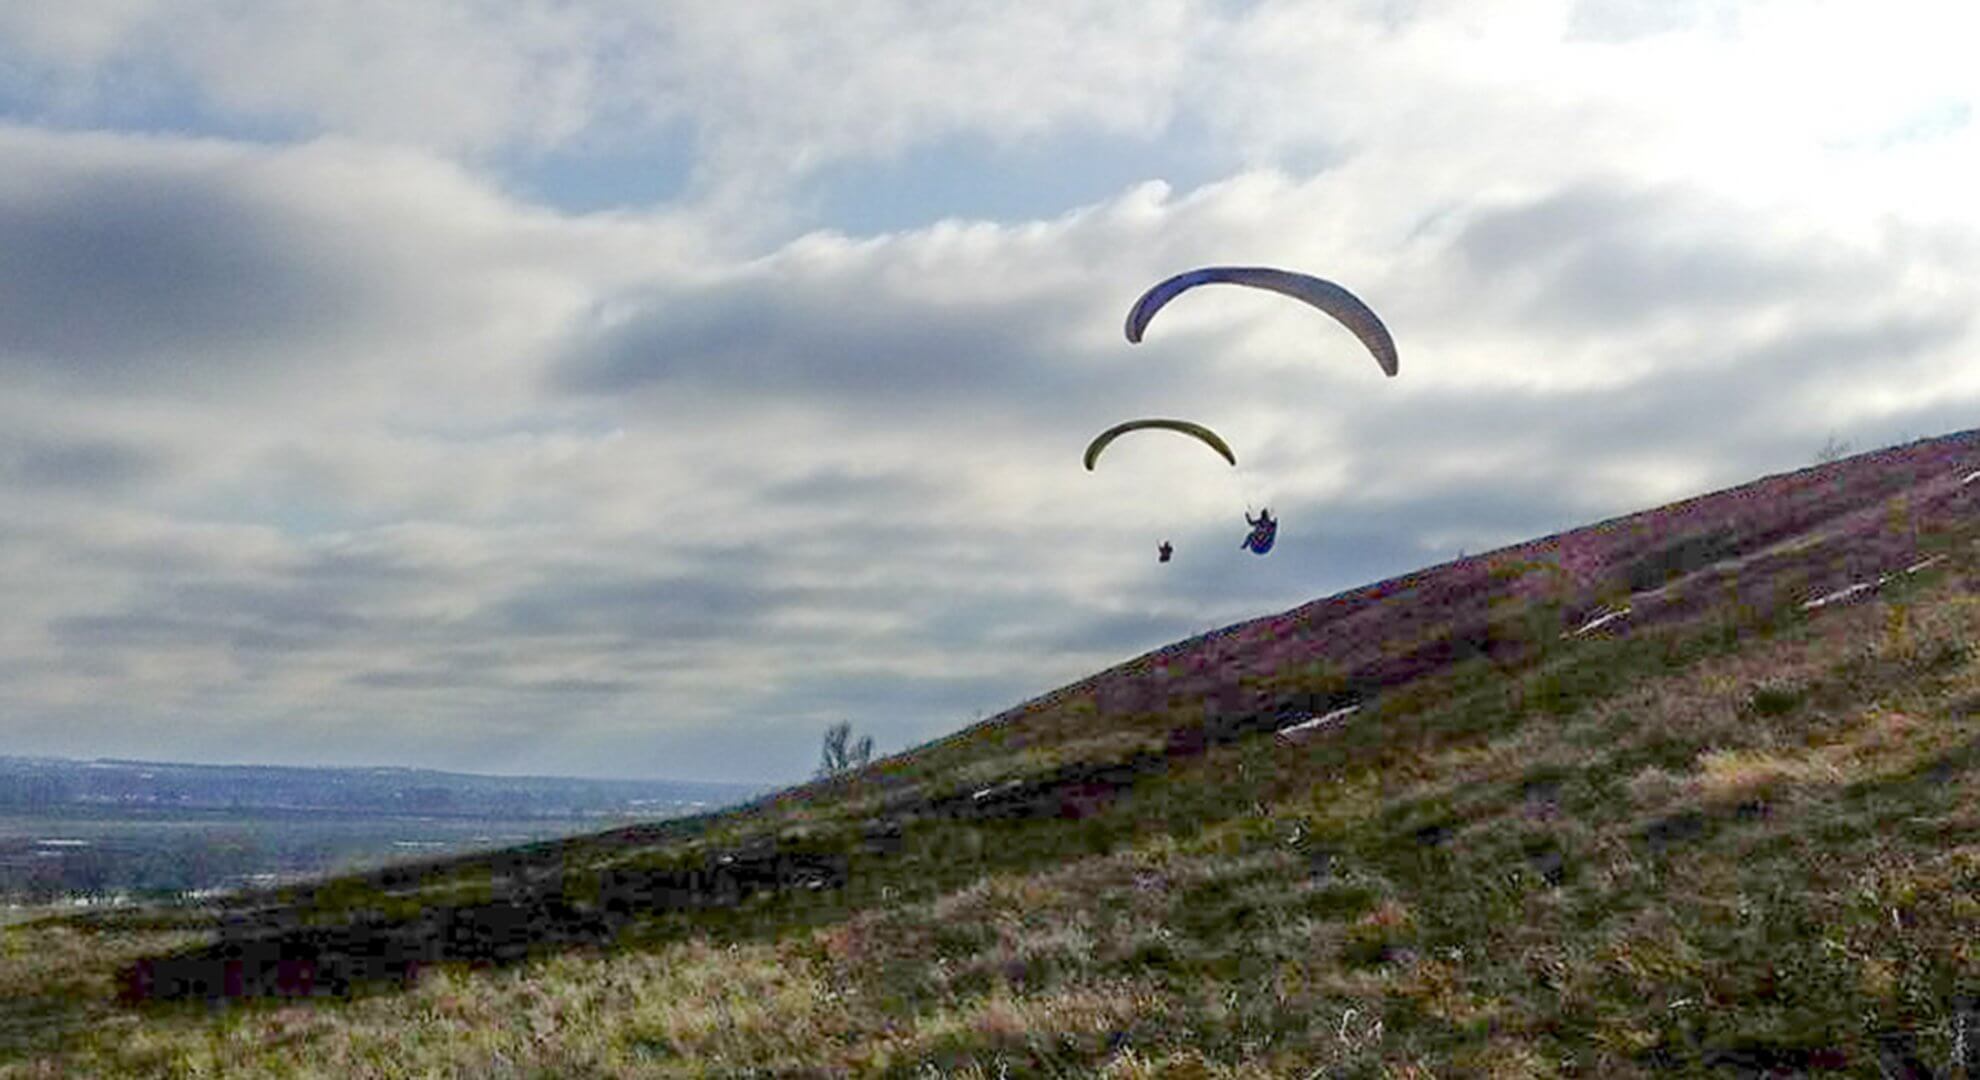 3-flight-on-paraglider-from-the-slope-kh